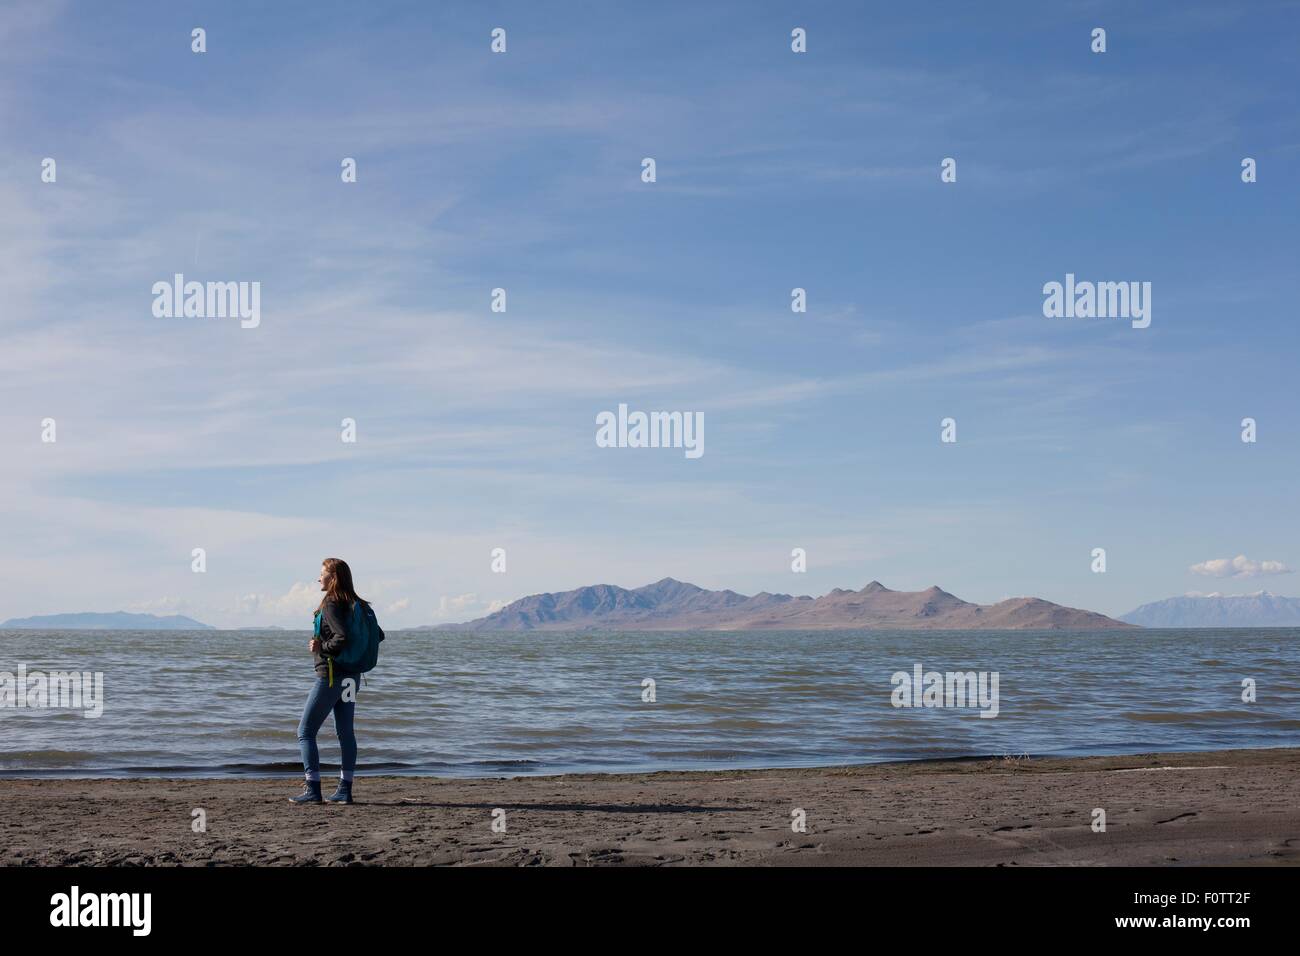 Rear view of young woman standing at waters edge looking out, Great Salt lake, Utah, USA Stock Photo